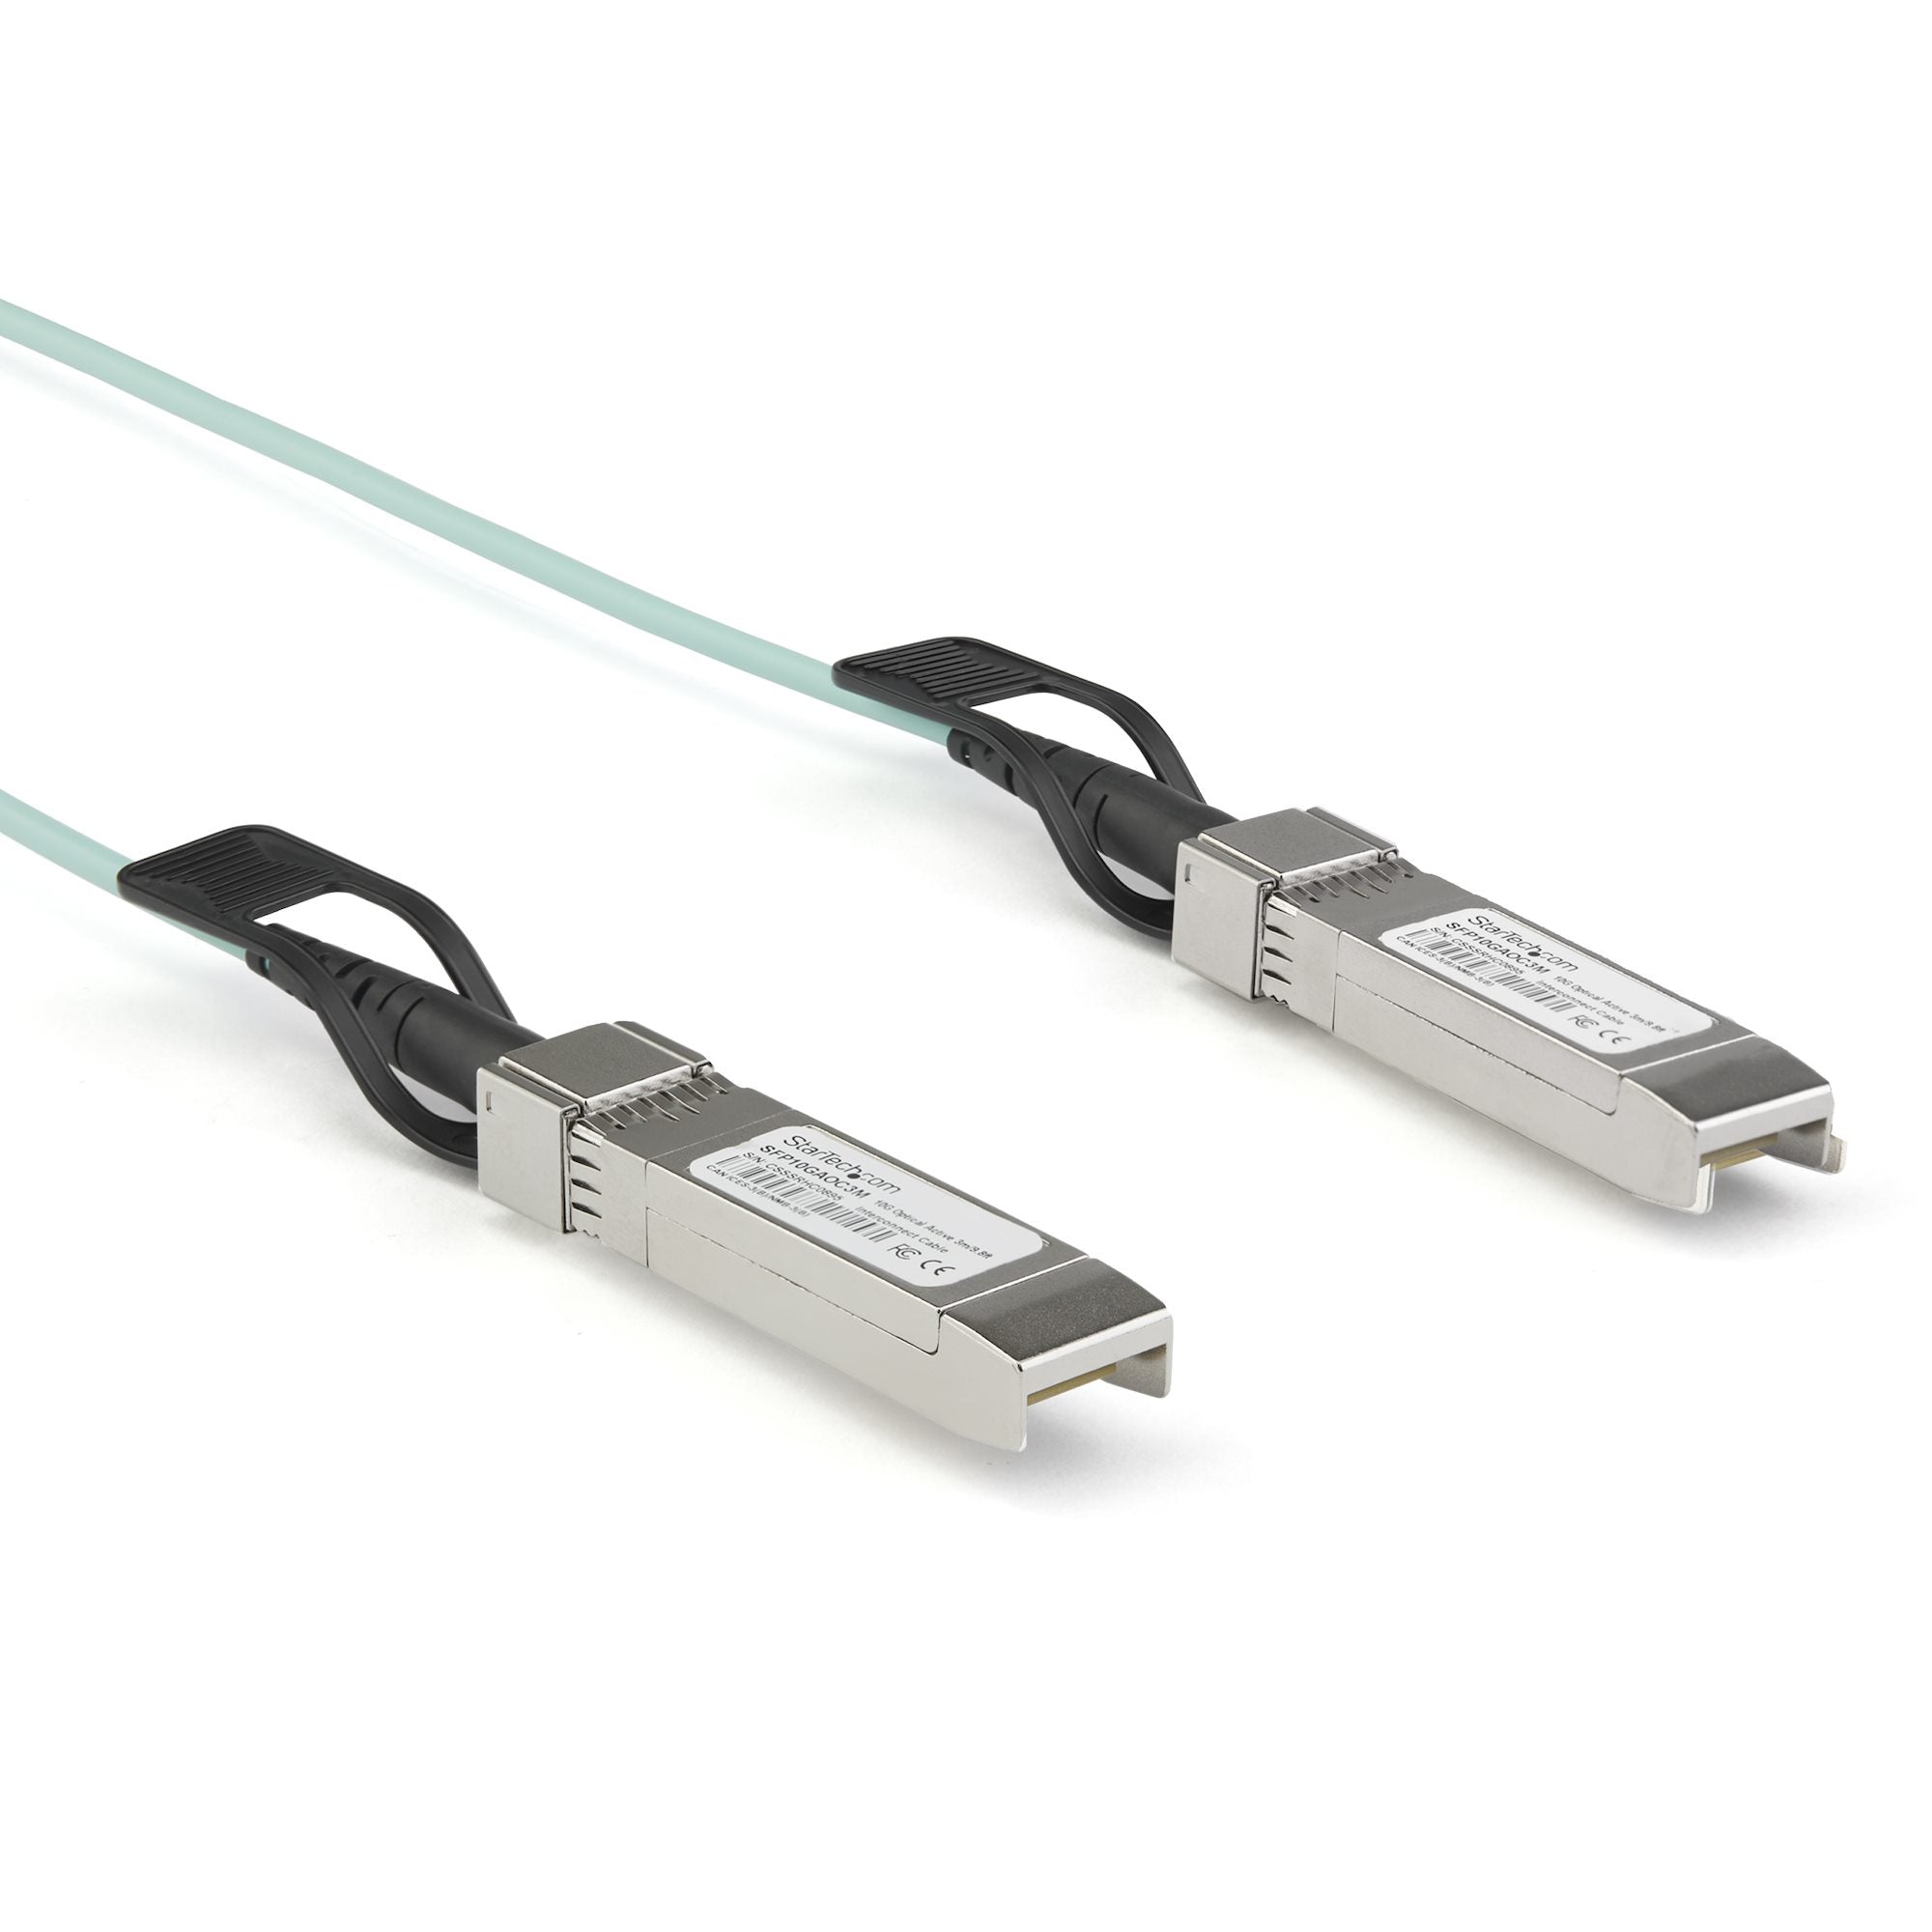 StarTech.com Dell EMC AOC-SFP-10G-5M Compatible 5m/16.4ft 10G SFP+ to SFP+ AOC Cable - 10GbE SFP+ Active Optical Fiber - 10Gbps SFP Plus/Mini GBIC/Transceiver Module Cable - ~Dell EMC AOC-SFP-10G-5M Compatible 5m/16.4ft 10G SFP+ to SFP+ AOC Cable - 10GbE